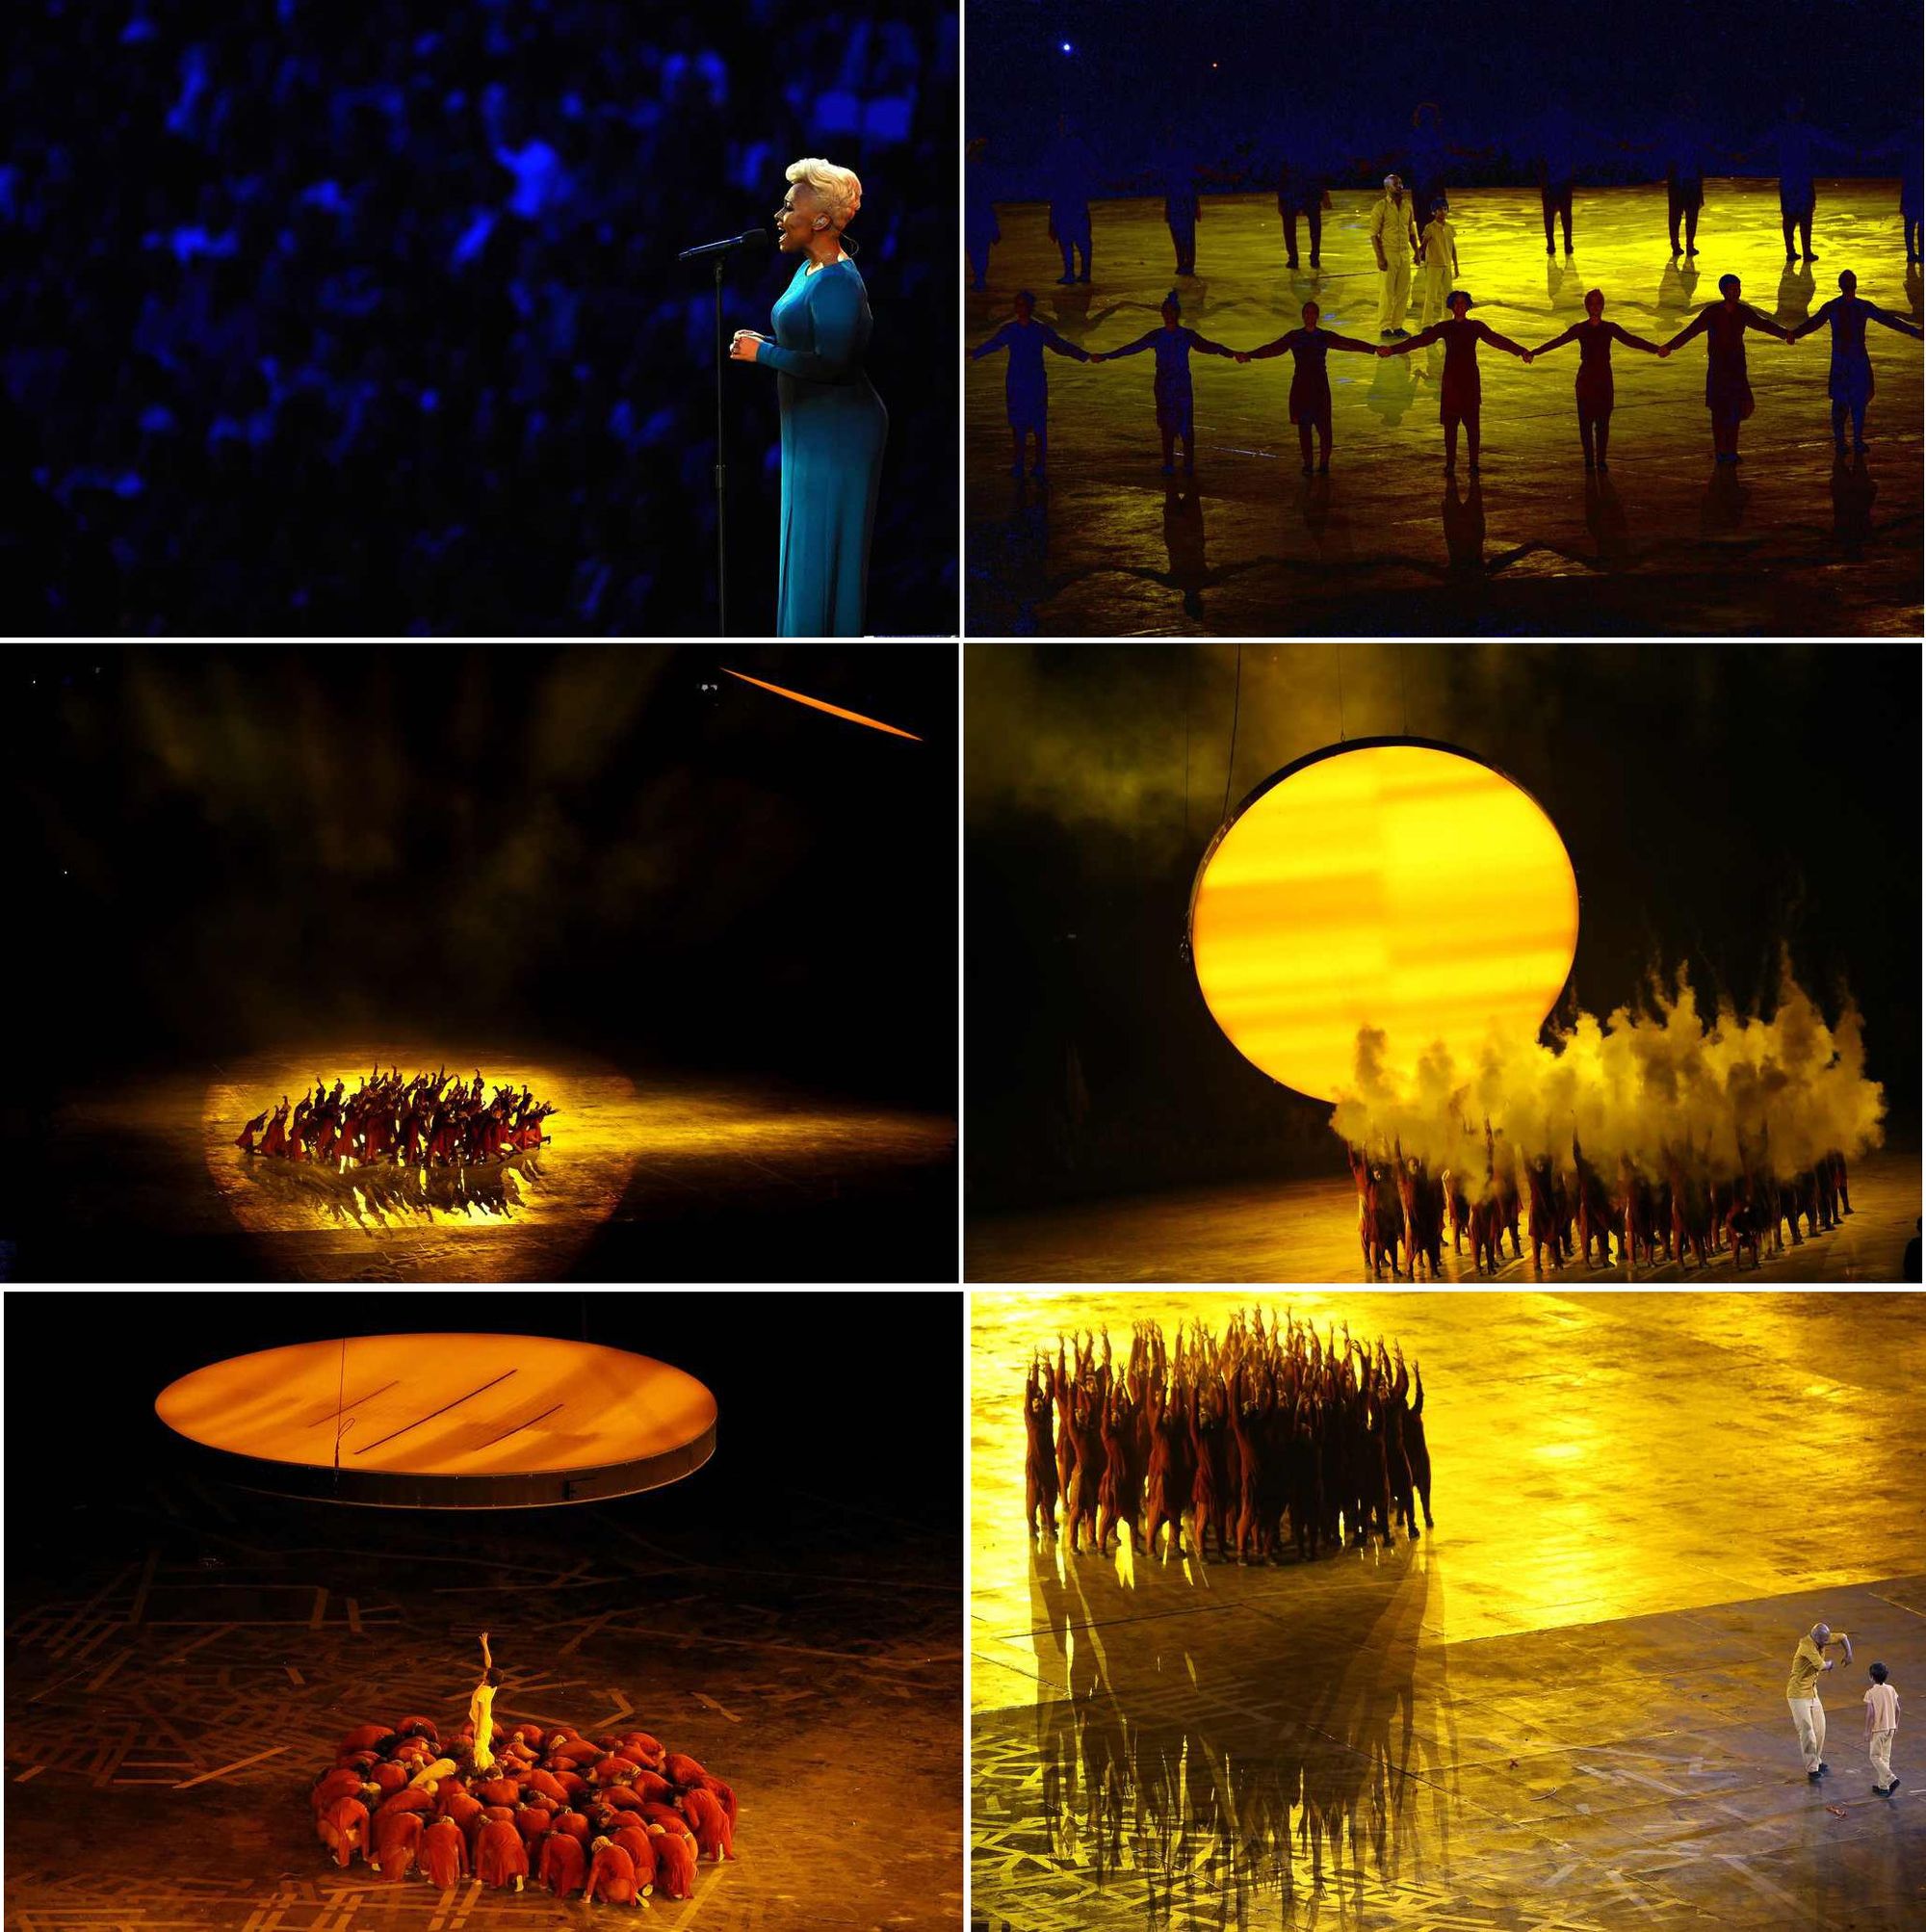 The sequence in remembrance of the victims of 7/7 train bombings at the London 2012 Olympics Opening Ceremony